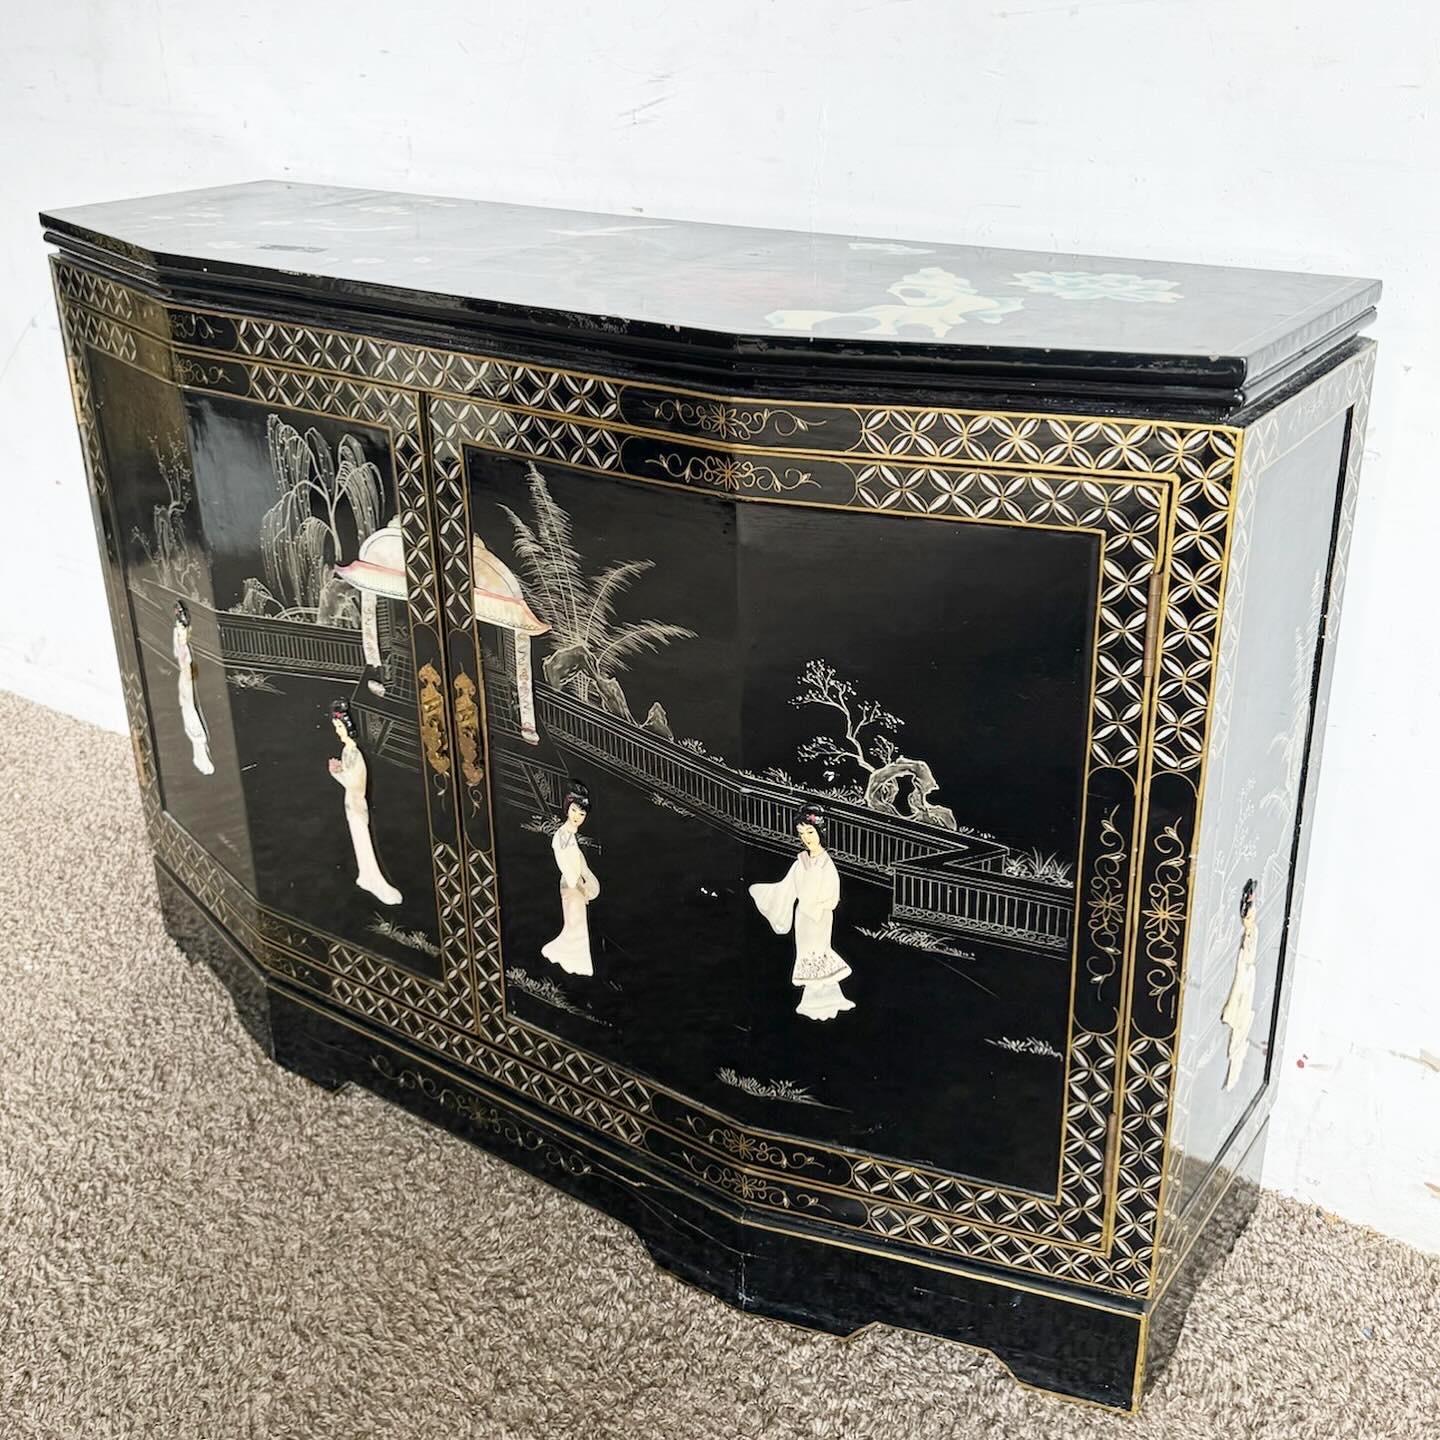 Immerse yourself in the splendor of a Chinese Black Lacquered and Hand Painted Sideboard, enriched with bone stone accents. This luxurious piece showcases the beauty of traditional Chinese art through its detailed hand-painted scenes and motifs, set